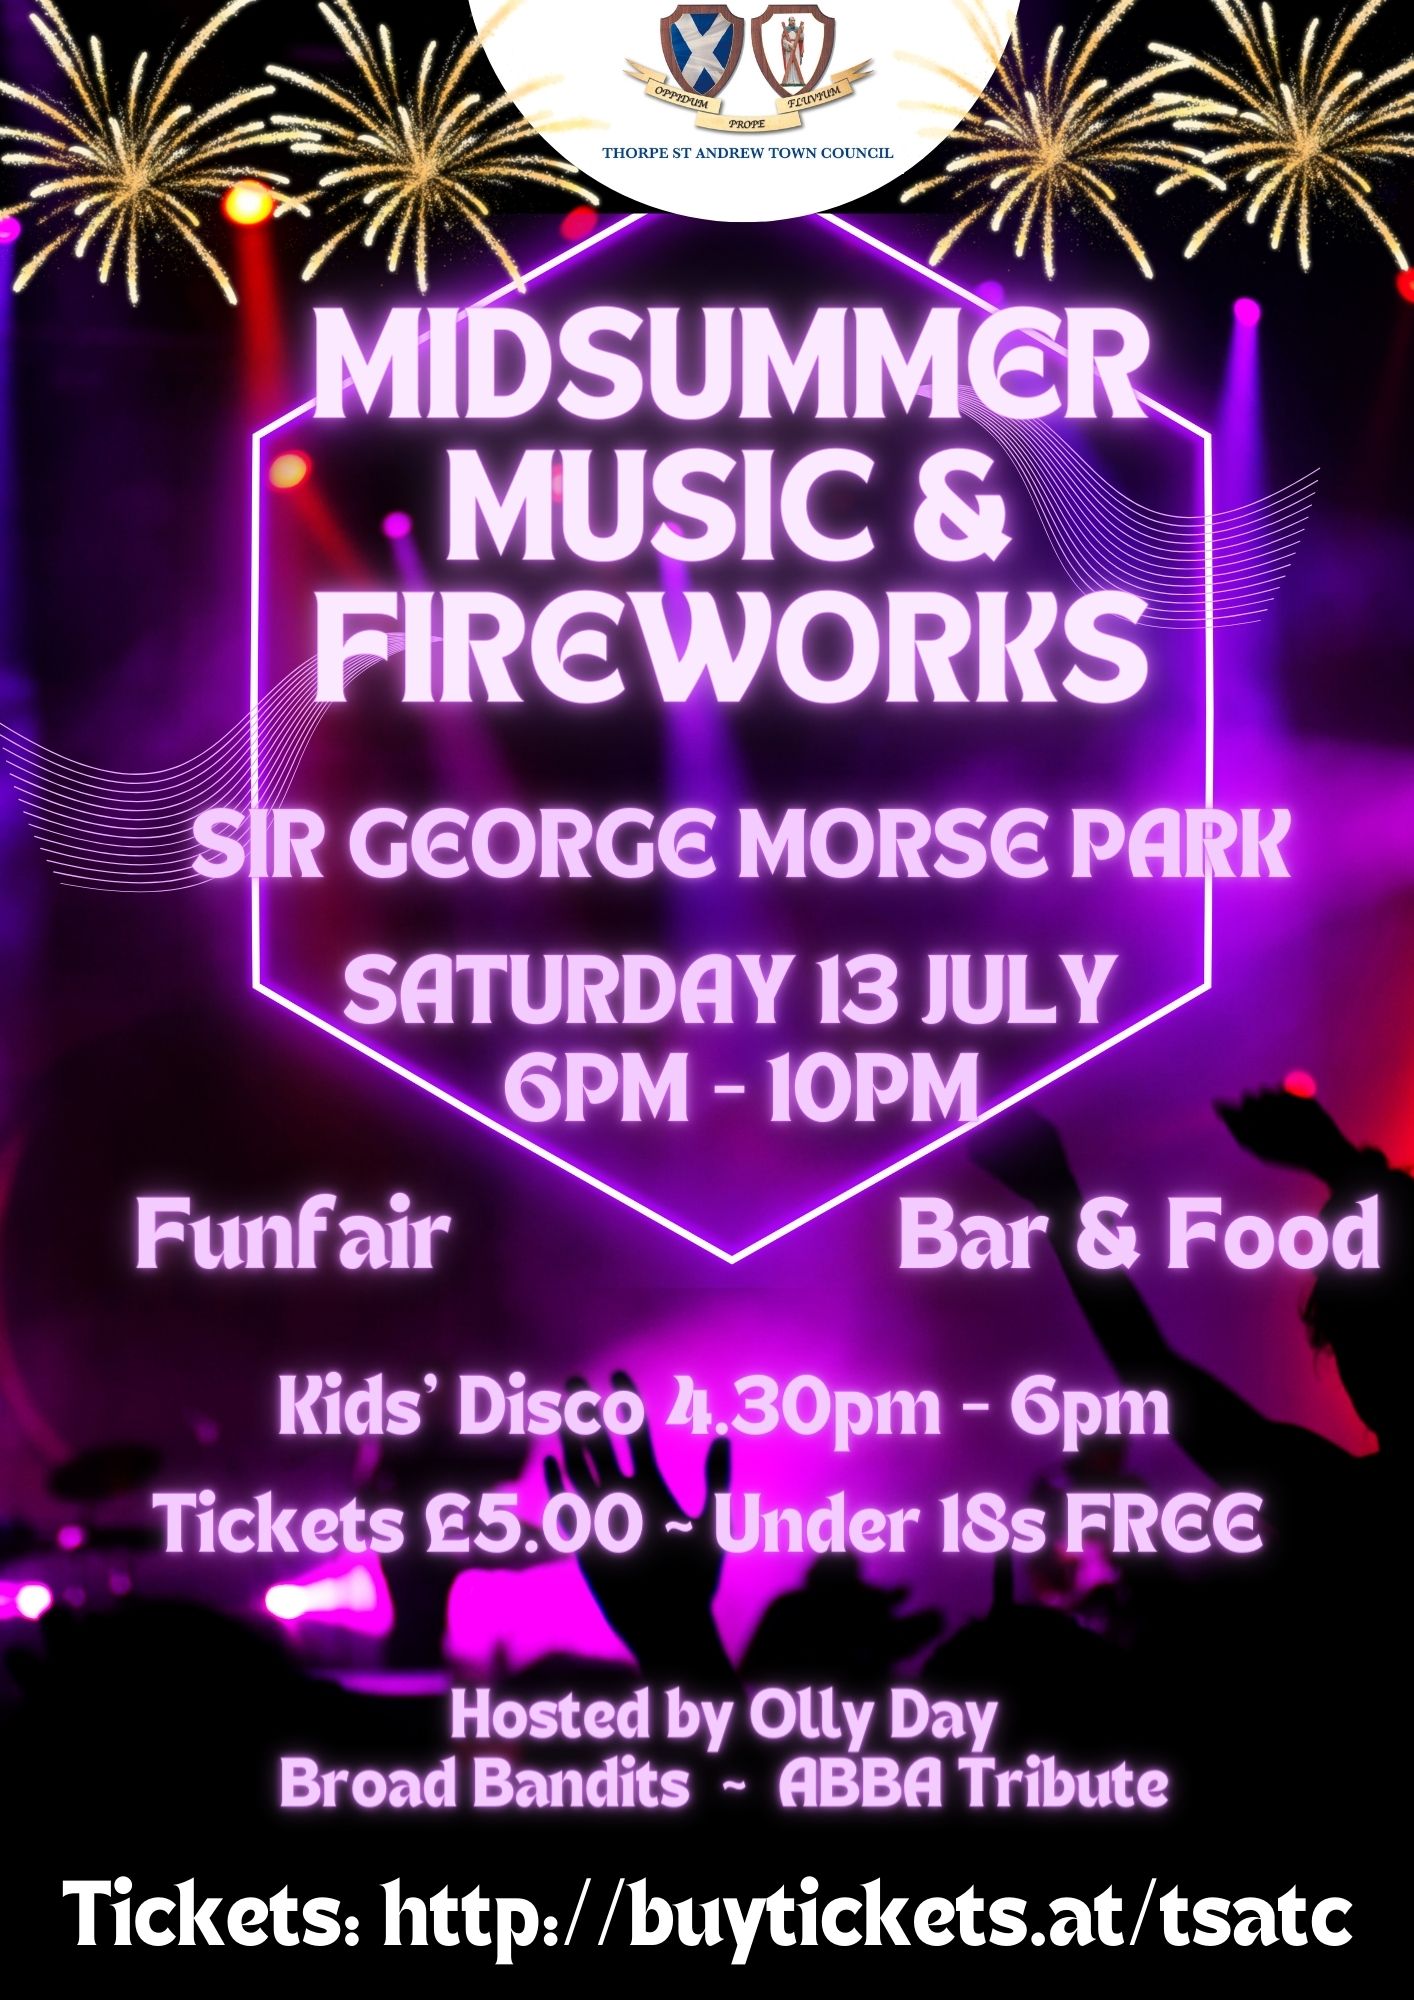 Image description: a purple and black silhouette of a music festival with yellow firework sparks at the top, and the factual information detailed in the post. Text reads "Midsummer Music & Fireworks. Sir George Morse Park. Saturday 13 July. 6pm- 10pm. Funfair. Bar & Food. Kids' Disco 4:30pm-6pm. Tickets £5.00 - under 18s free. Hosted by Olly Day, Broad Bandits and ABBA tribute. Tickets: http://buytickets.at/tsatc